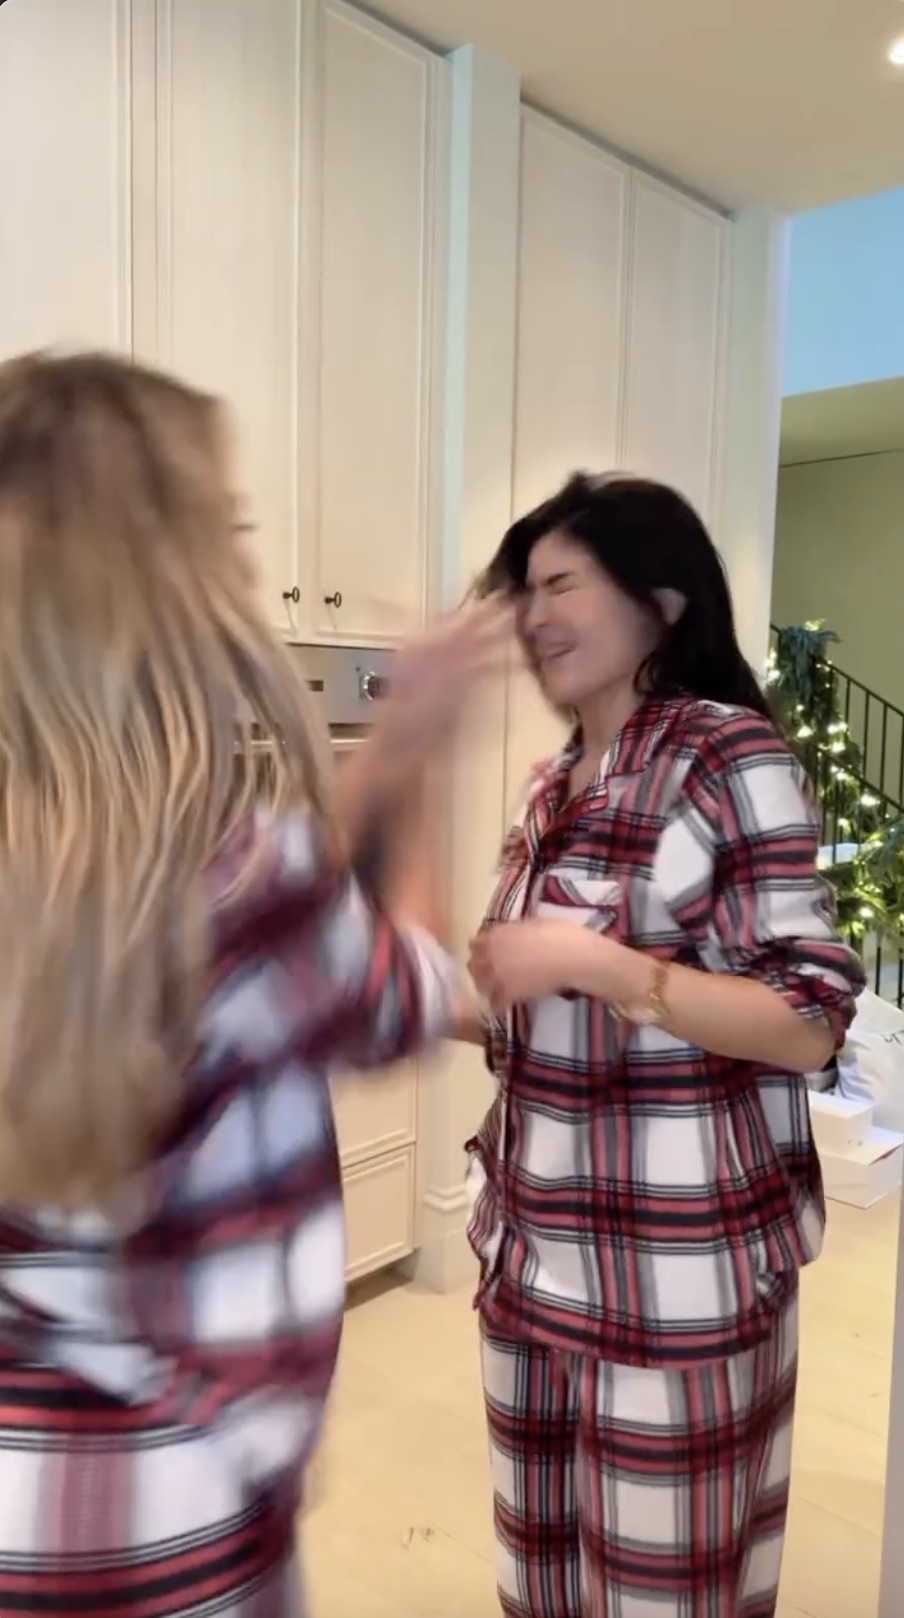 Khloe ended up cursing at and slapping her younger sister